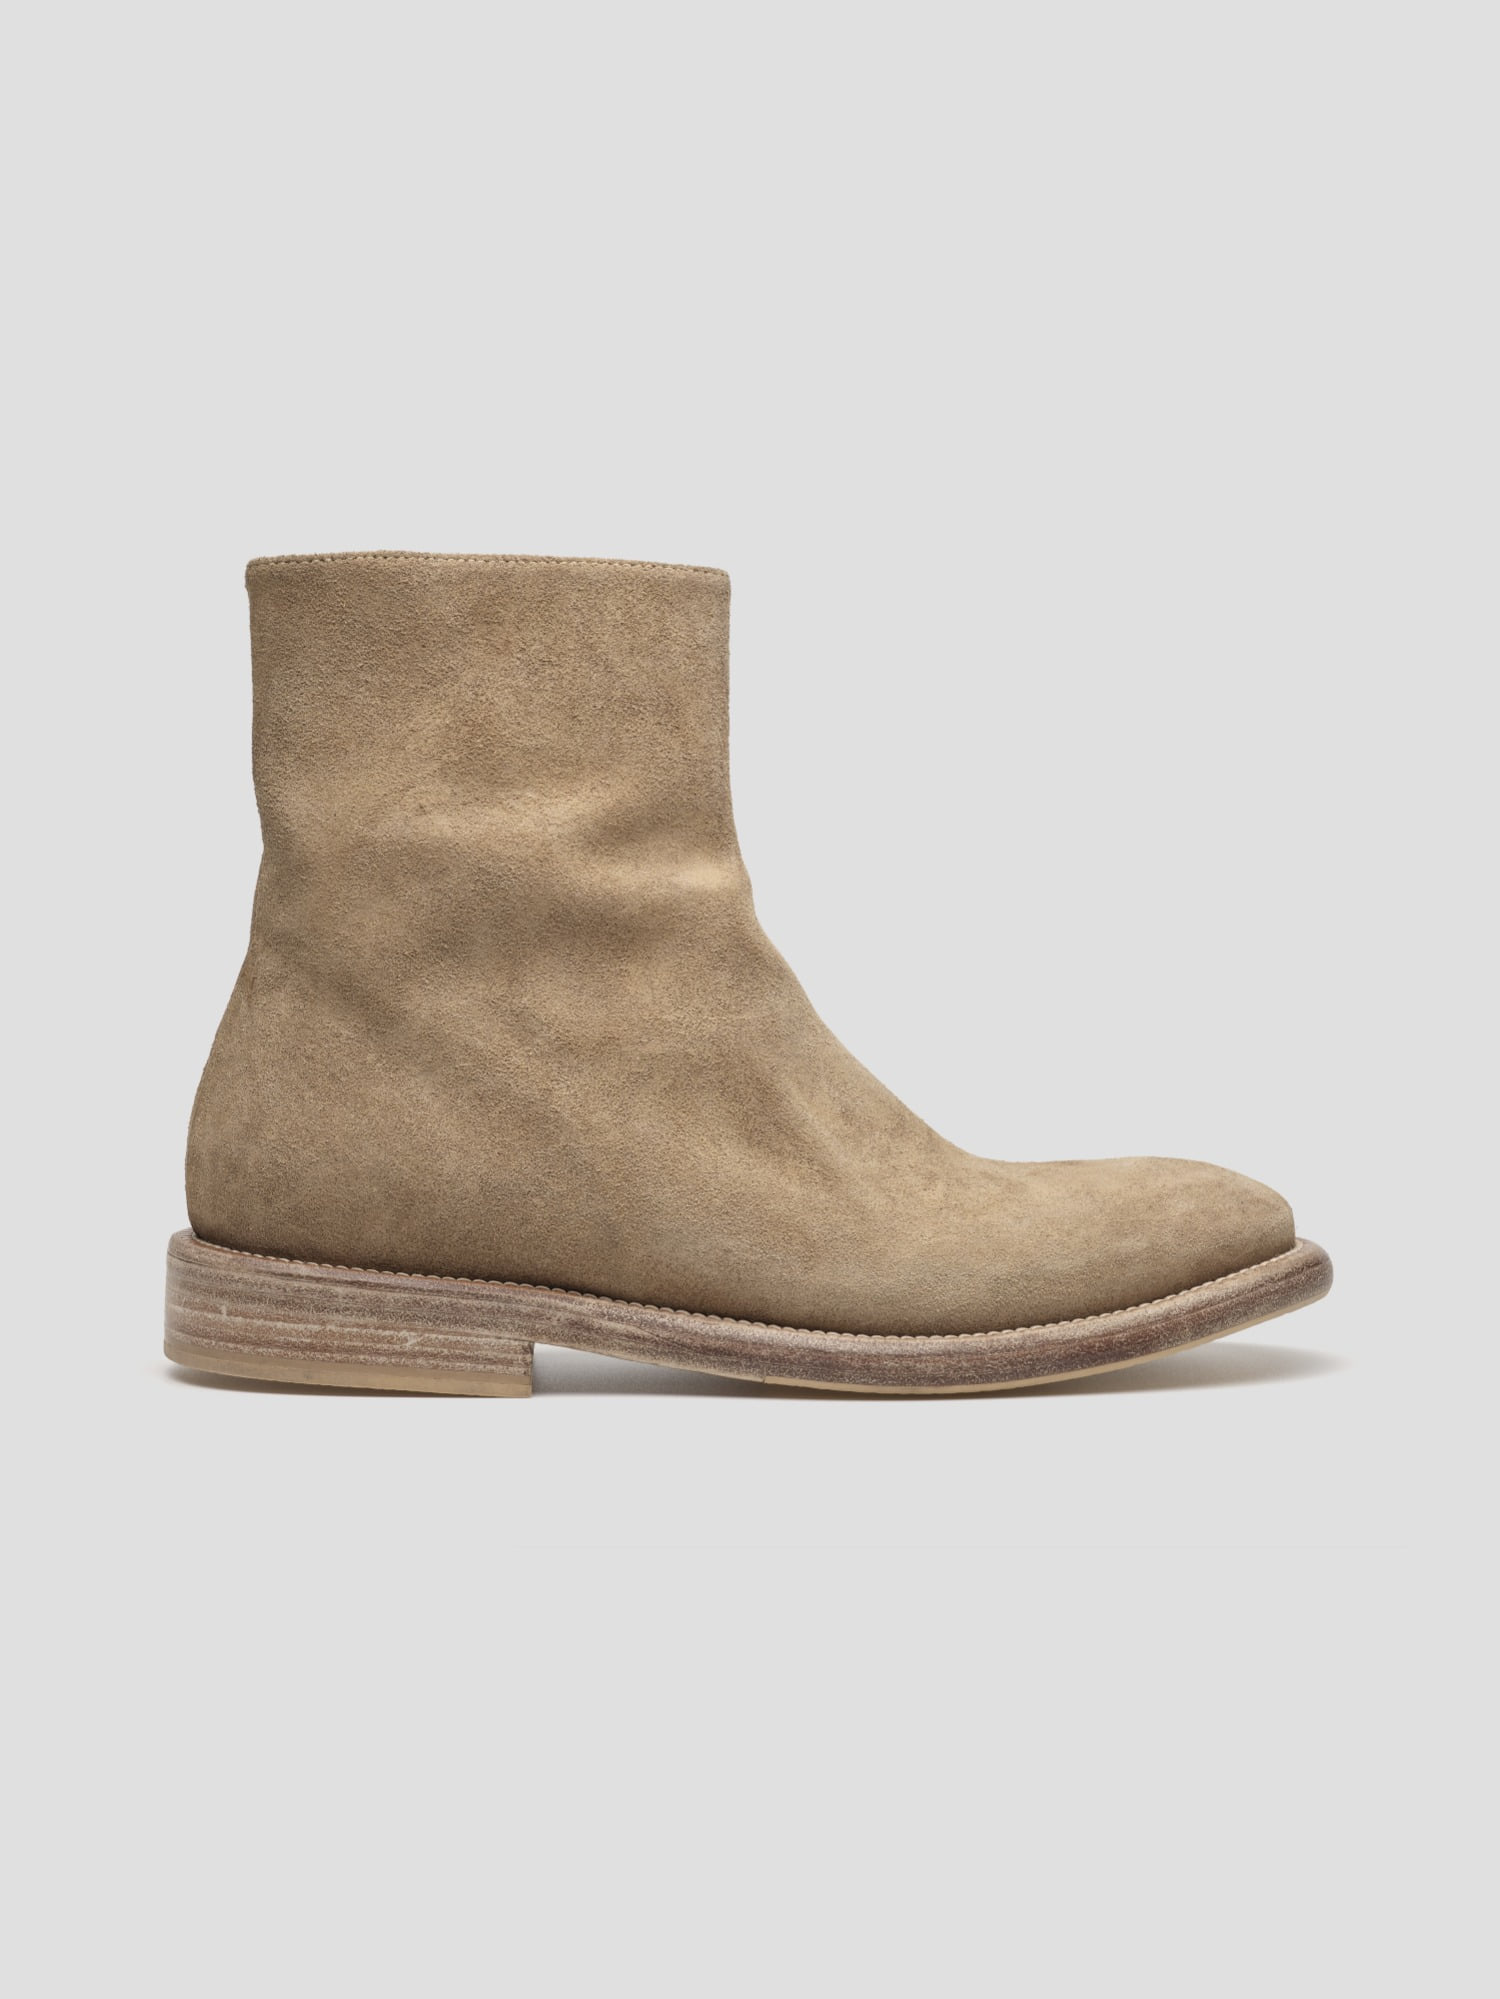 boots 01 suede sand 스니커즈와 구두